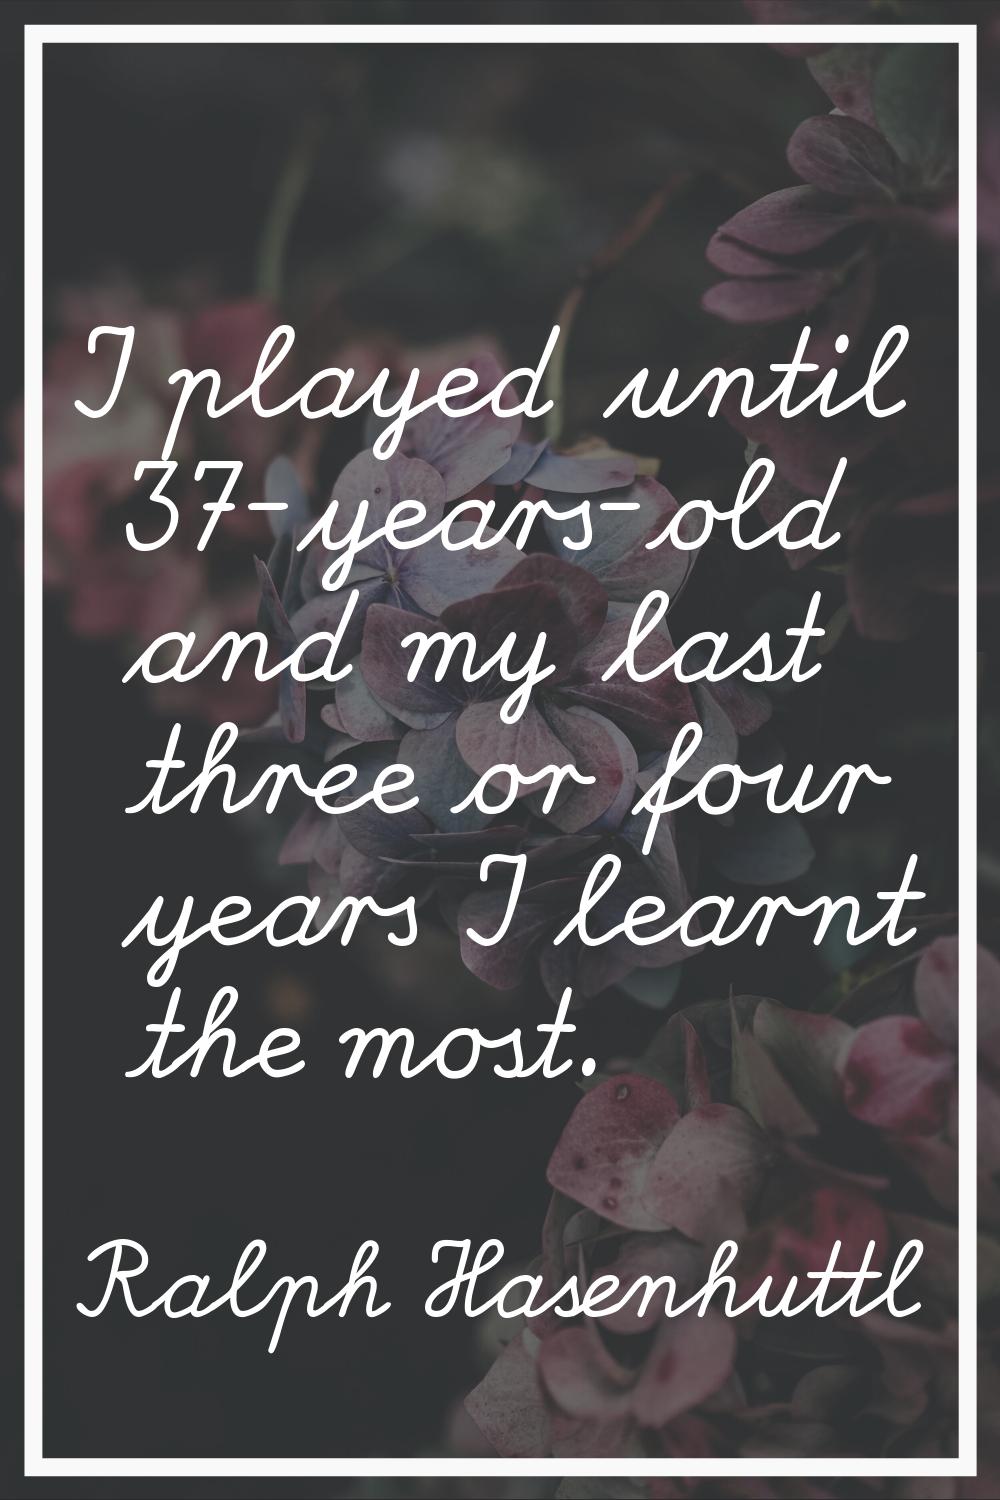 I played until 37-years-old and my last three or four years I learnt the most.